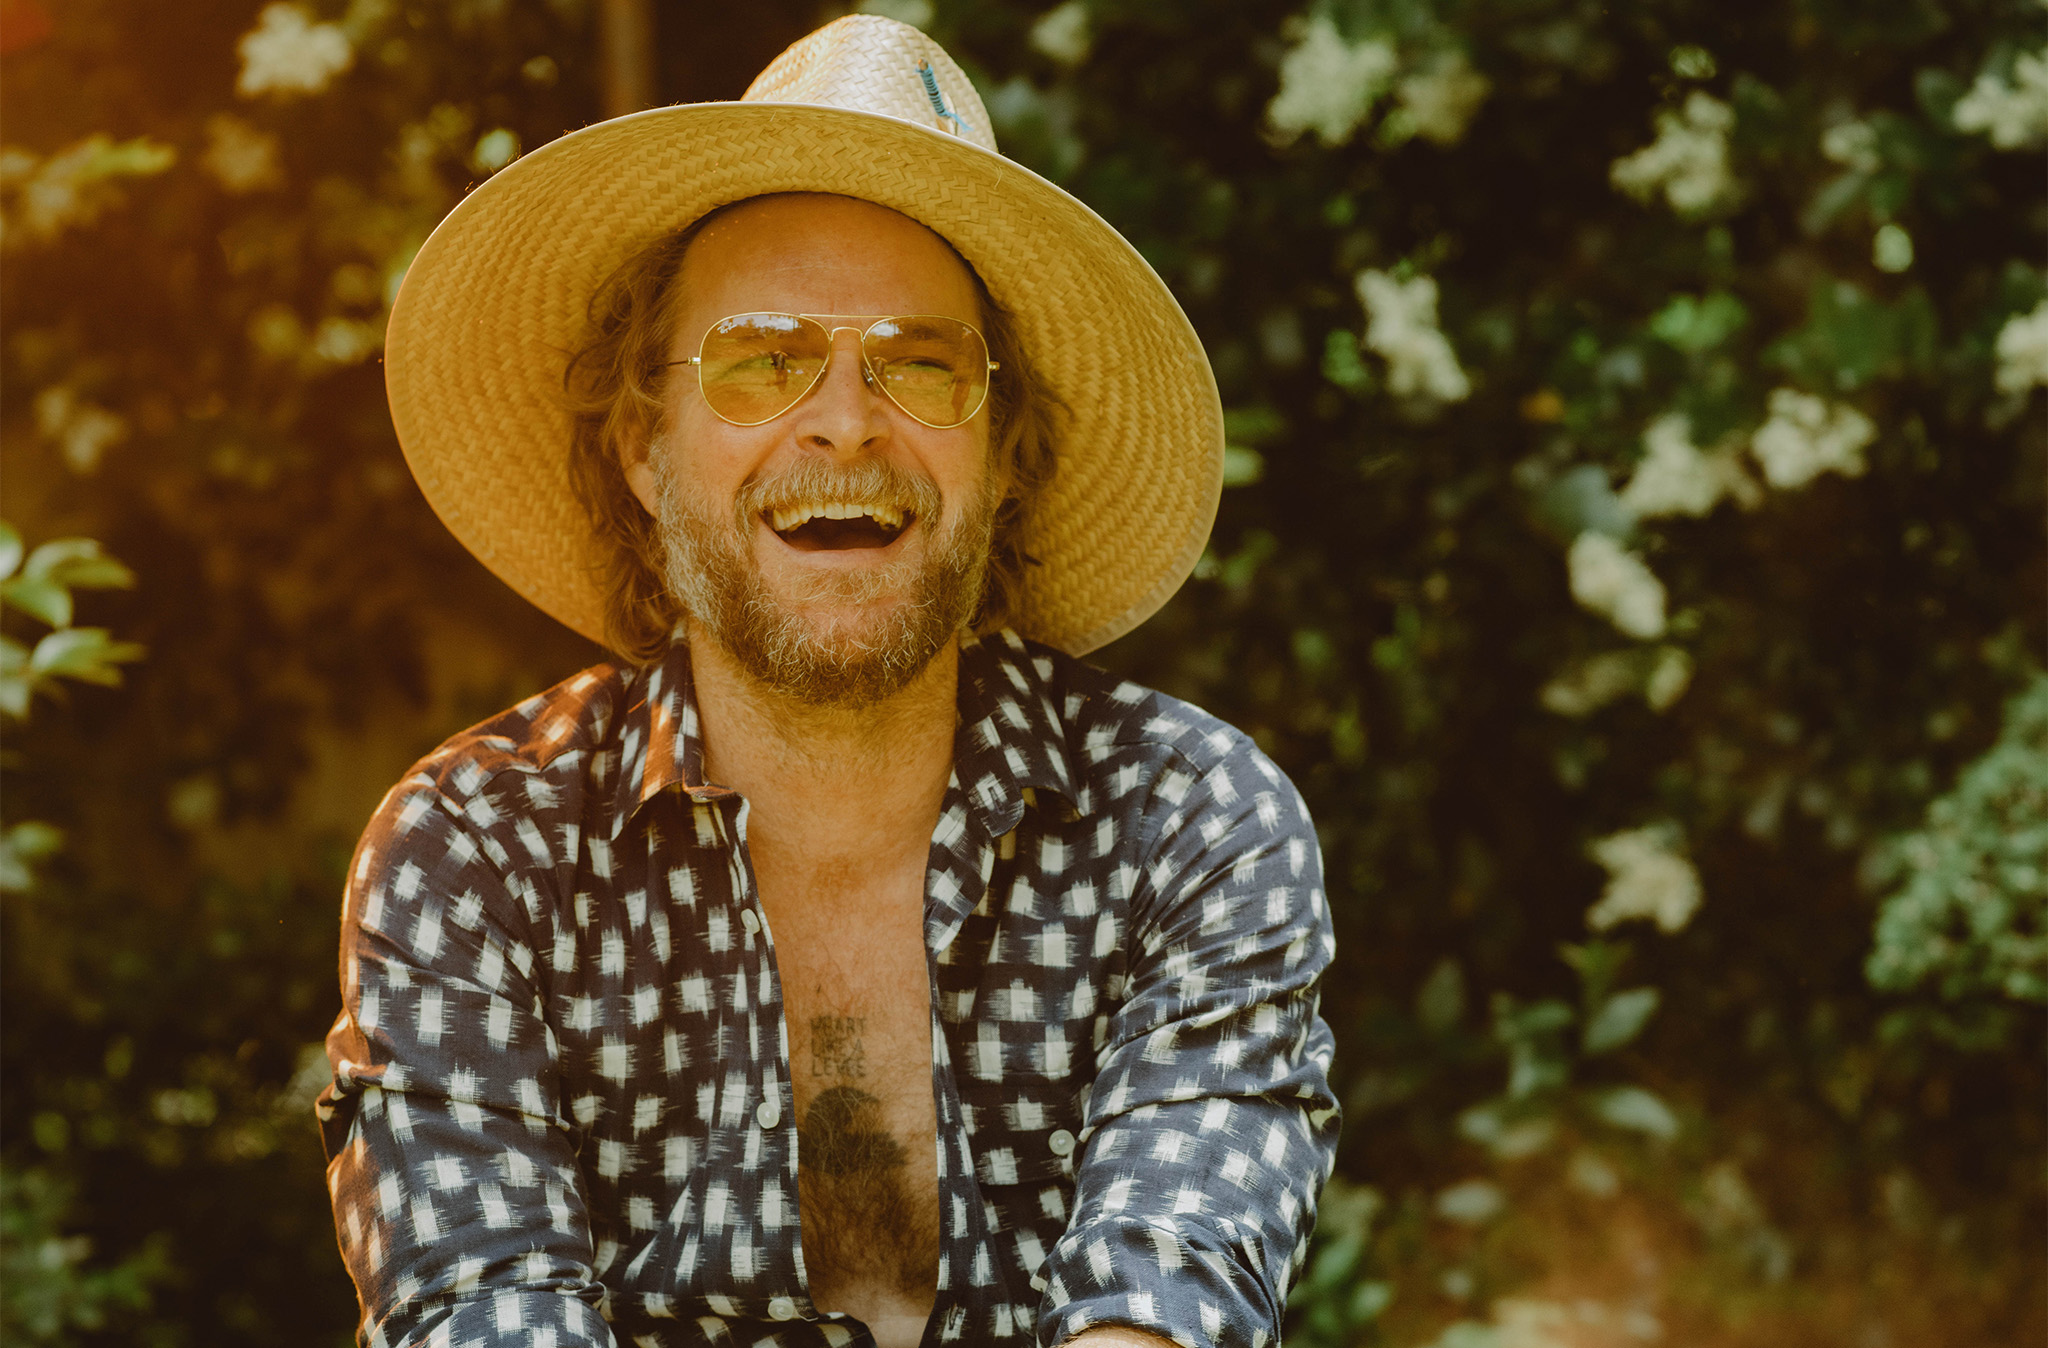 A photo of M.C. Taylor, band leader of the group Hiss Golden Messenger. He is outdoors in sunny weather wearing a hat and smiling.